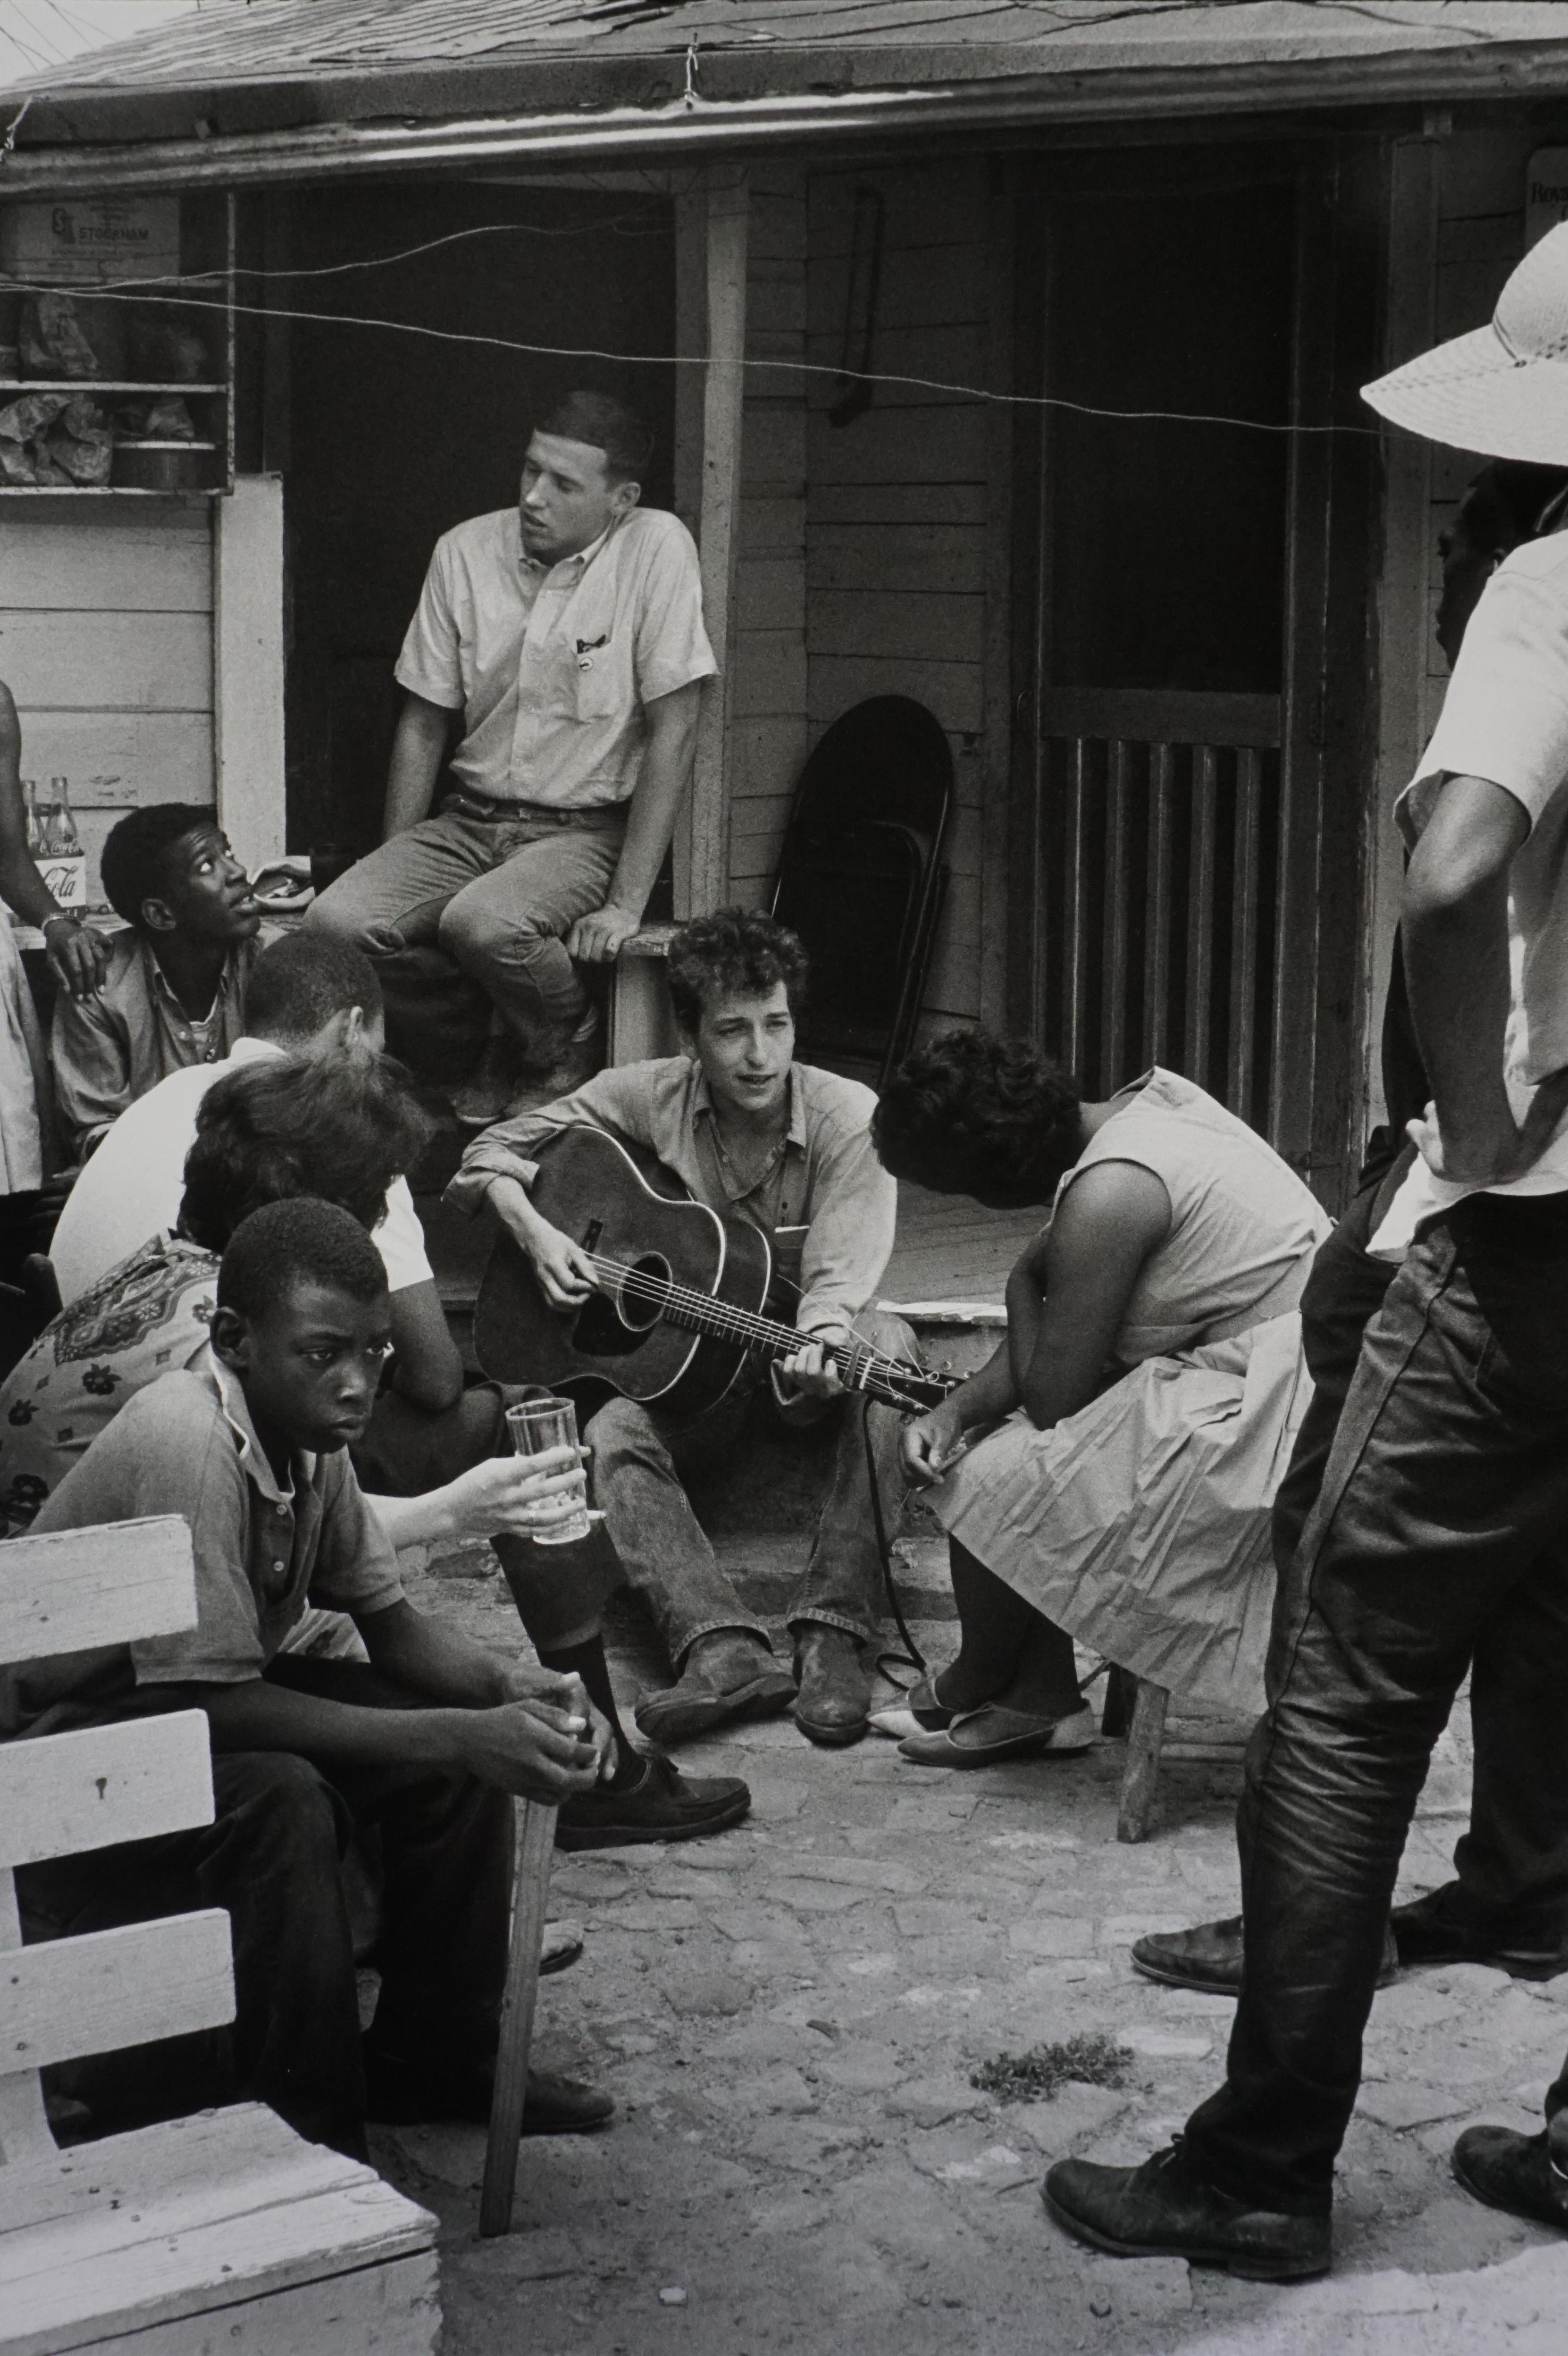 Danny Lyon Black and White Photograph - Bob Dylan Behind the SNCC Office, 1963